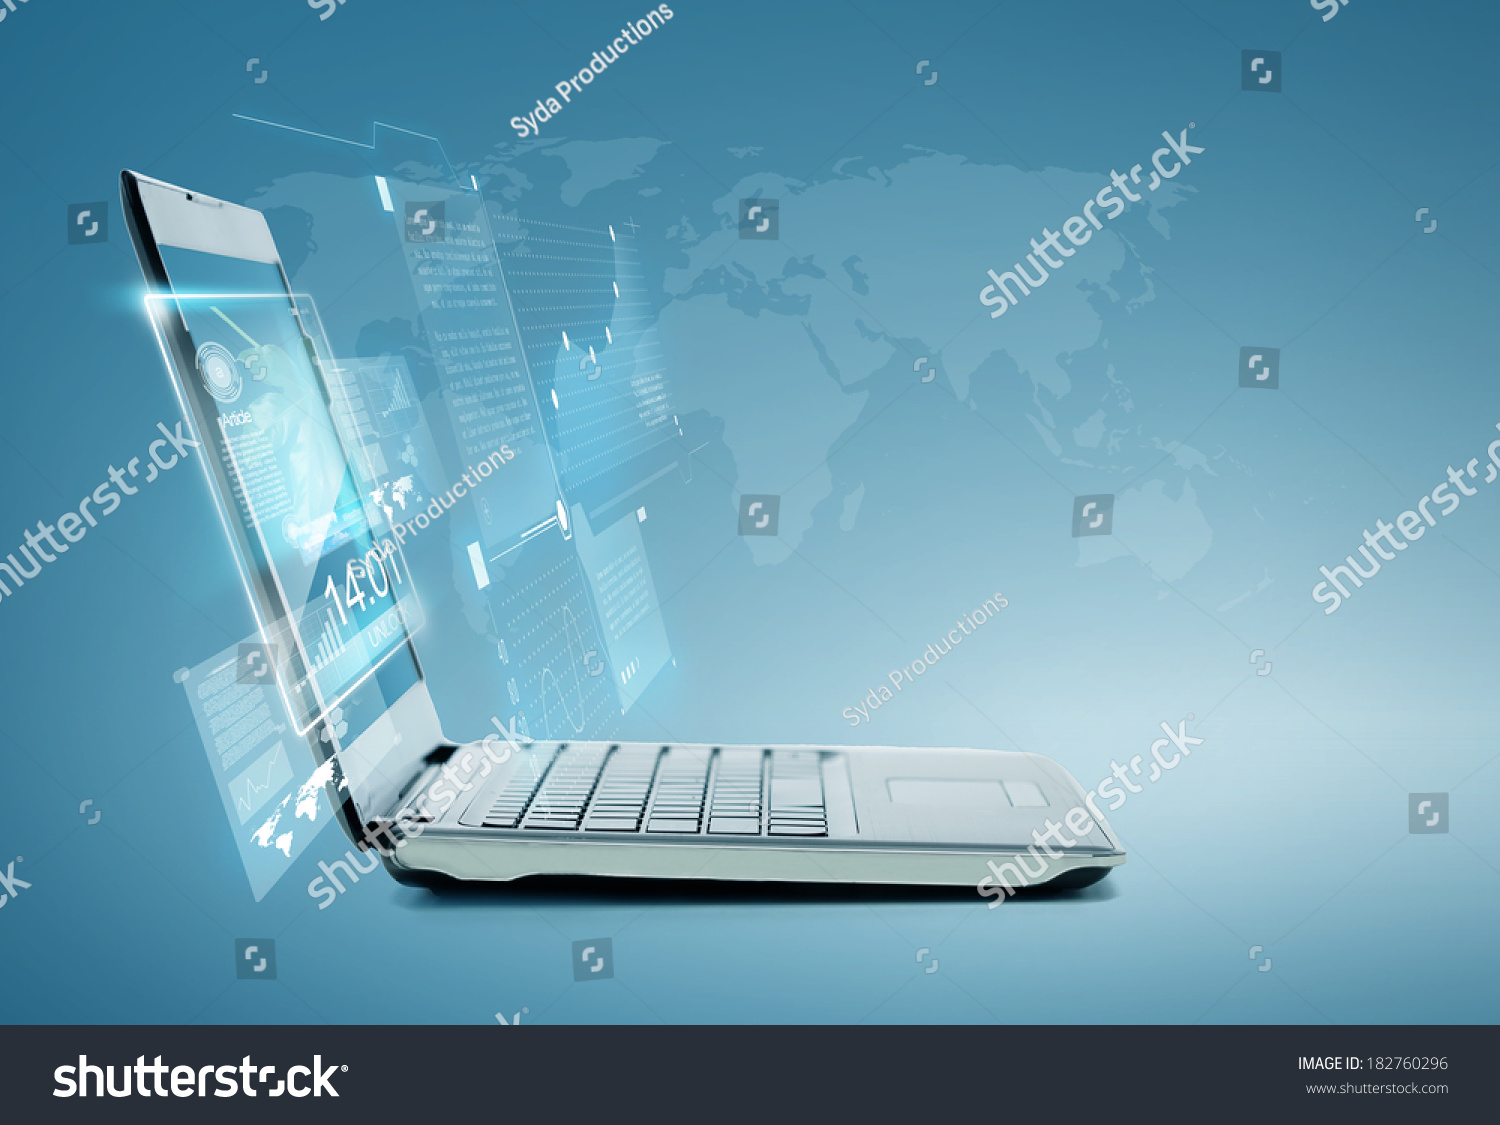 technology and advertisement concept - laptop computer with chart and graphs on screen #182760296